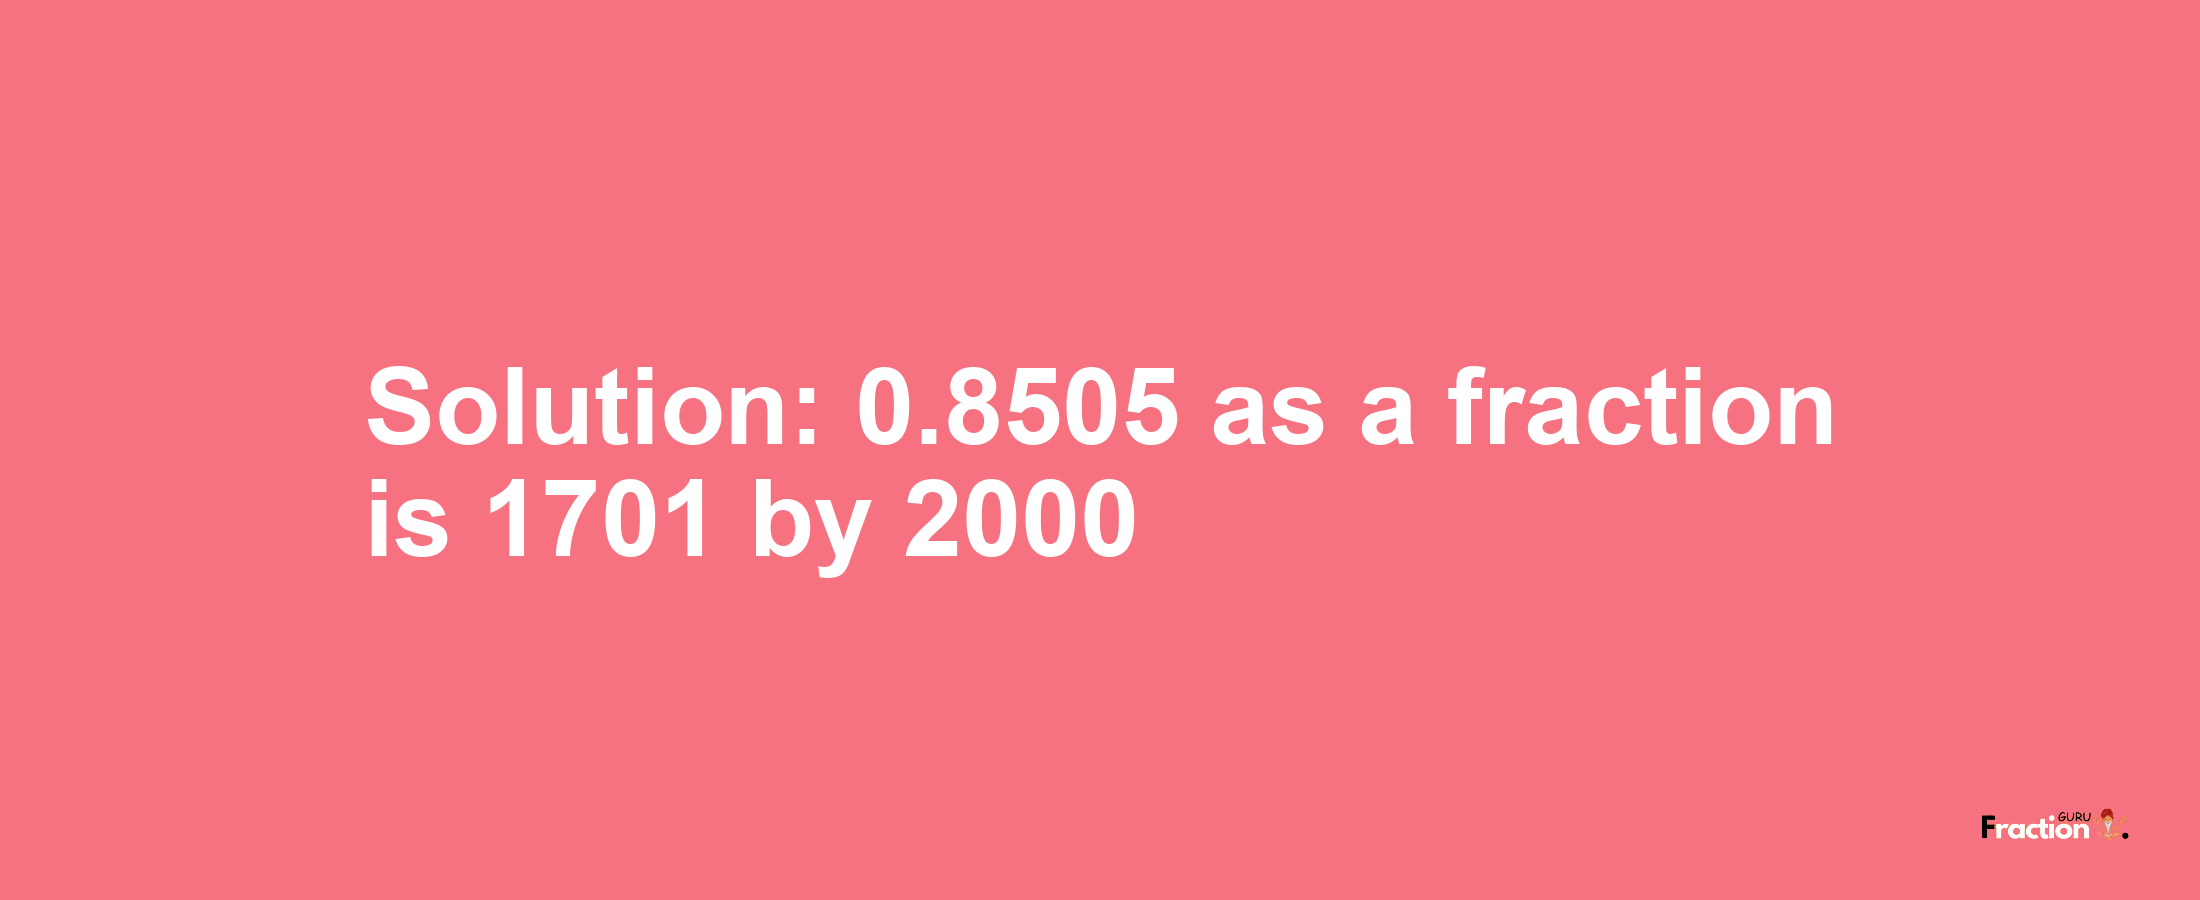 Solution:0.8505 as a fraction is 1701/2000